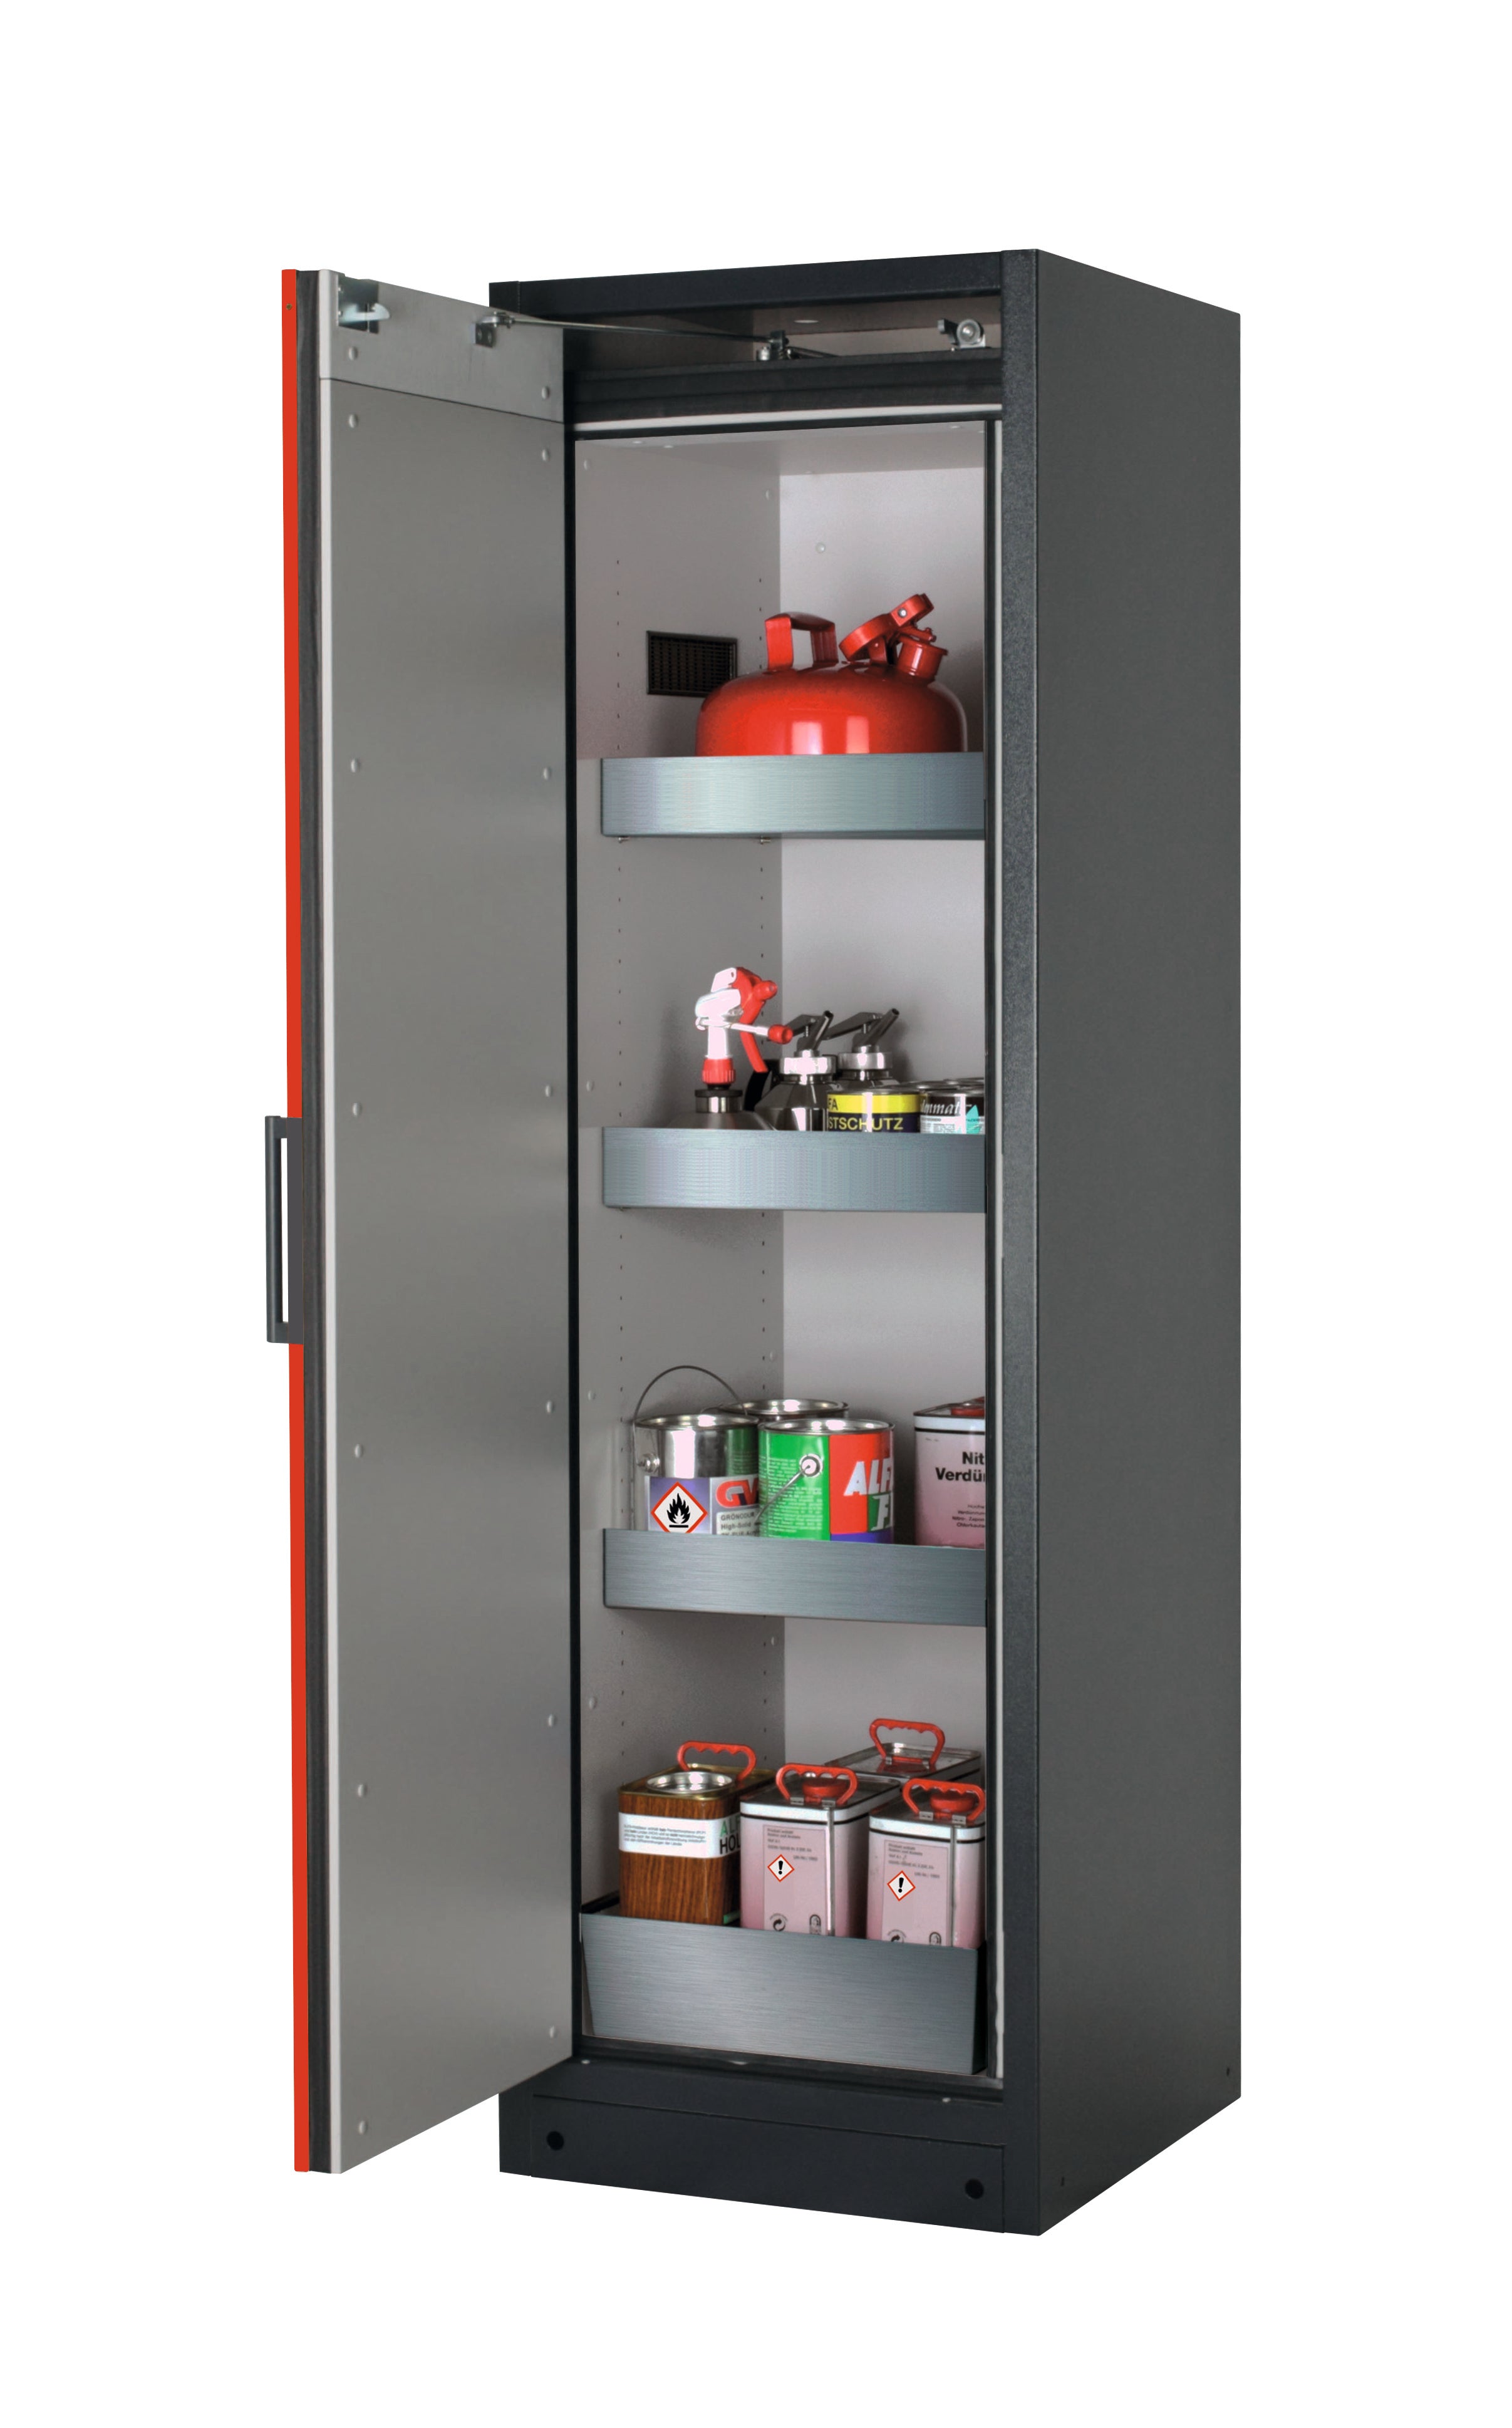 Type 90 safety storage cabinet Q-PEGASUS-90 model Q90.195.060.WDAC in traffic red RAL 3020 with 3x tray shelf (standard) (stainless steel 1.4301),